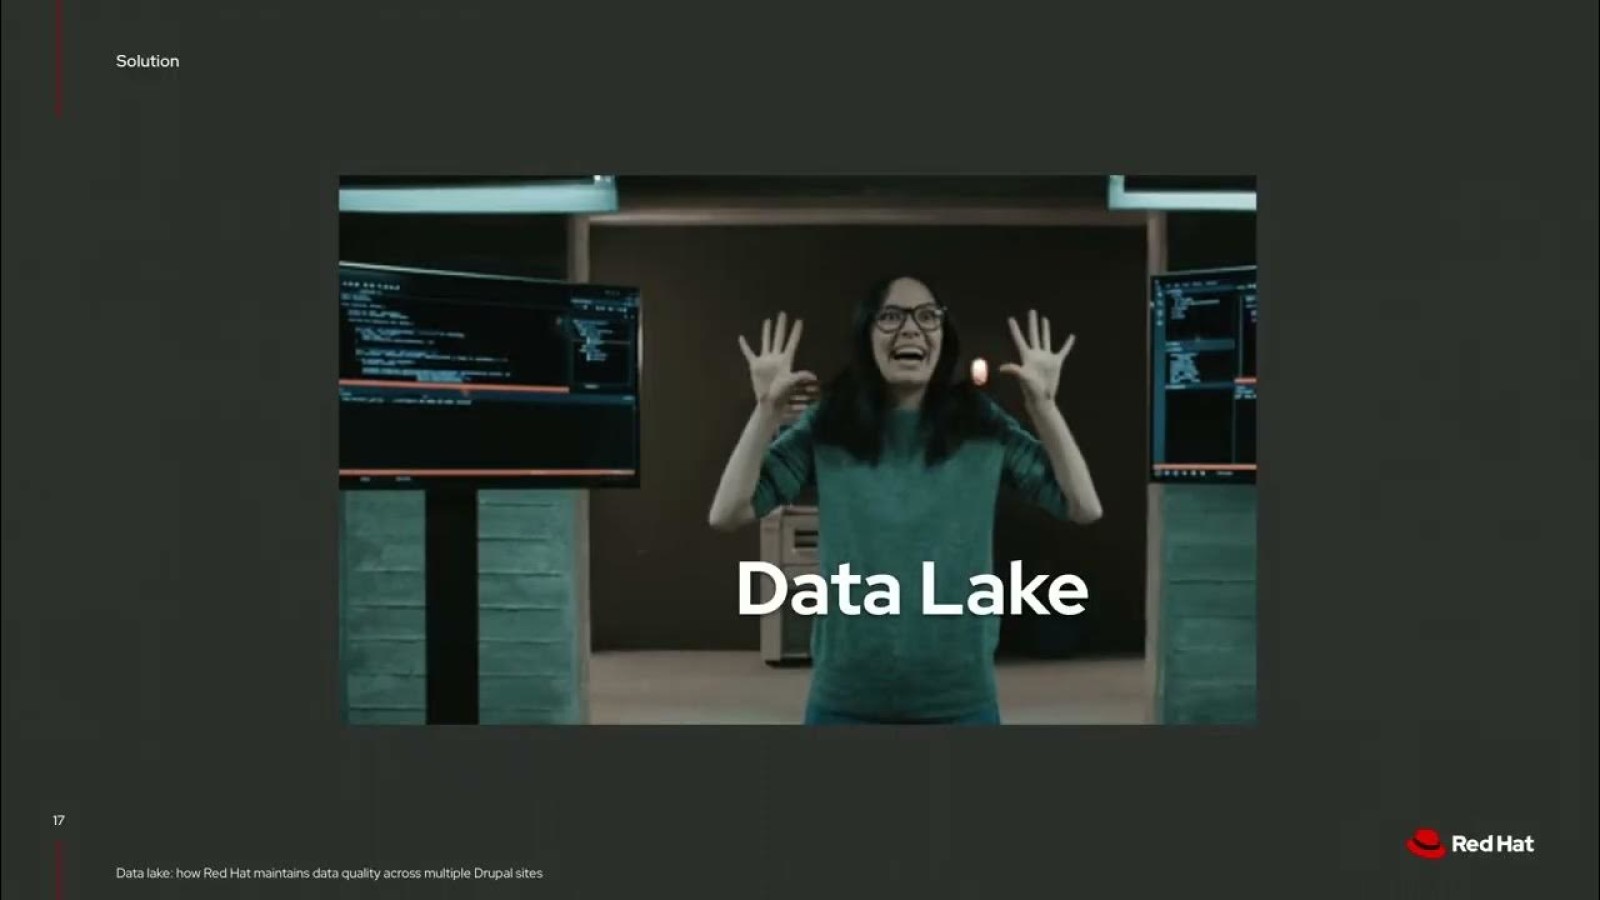 Data lake: how Red Hat maintains data quality across multiple Drupal sites